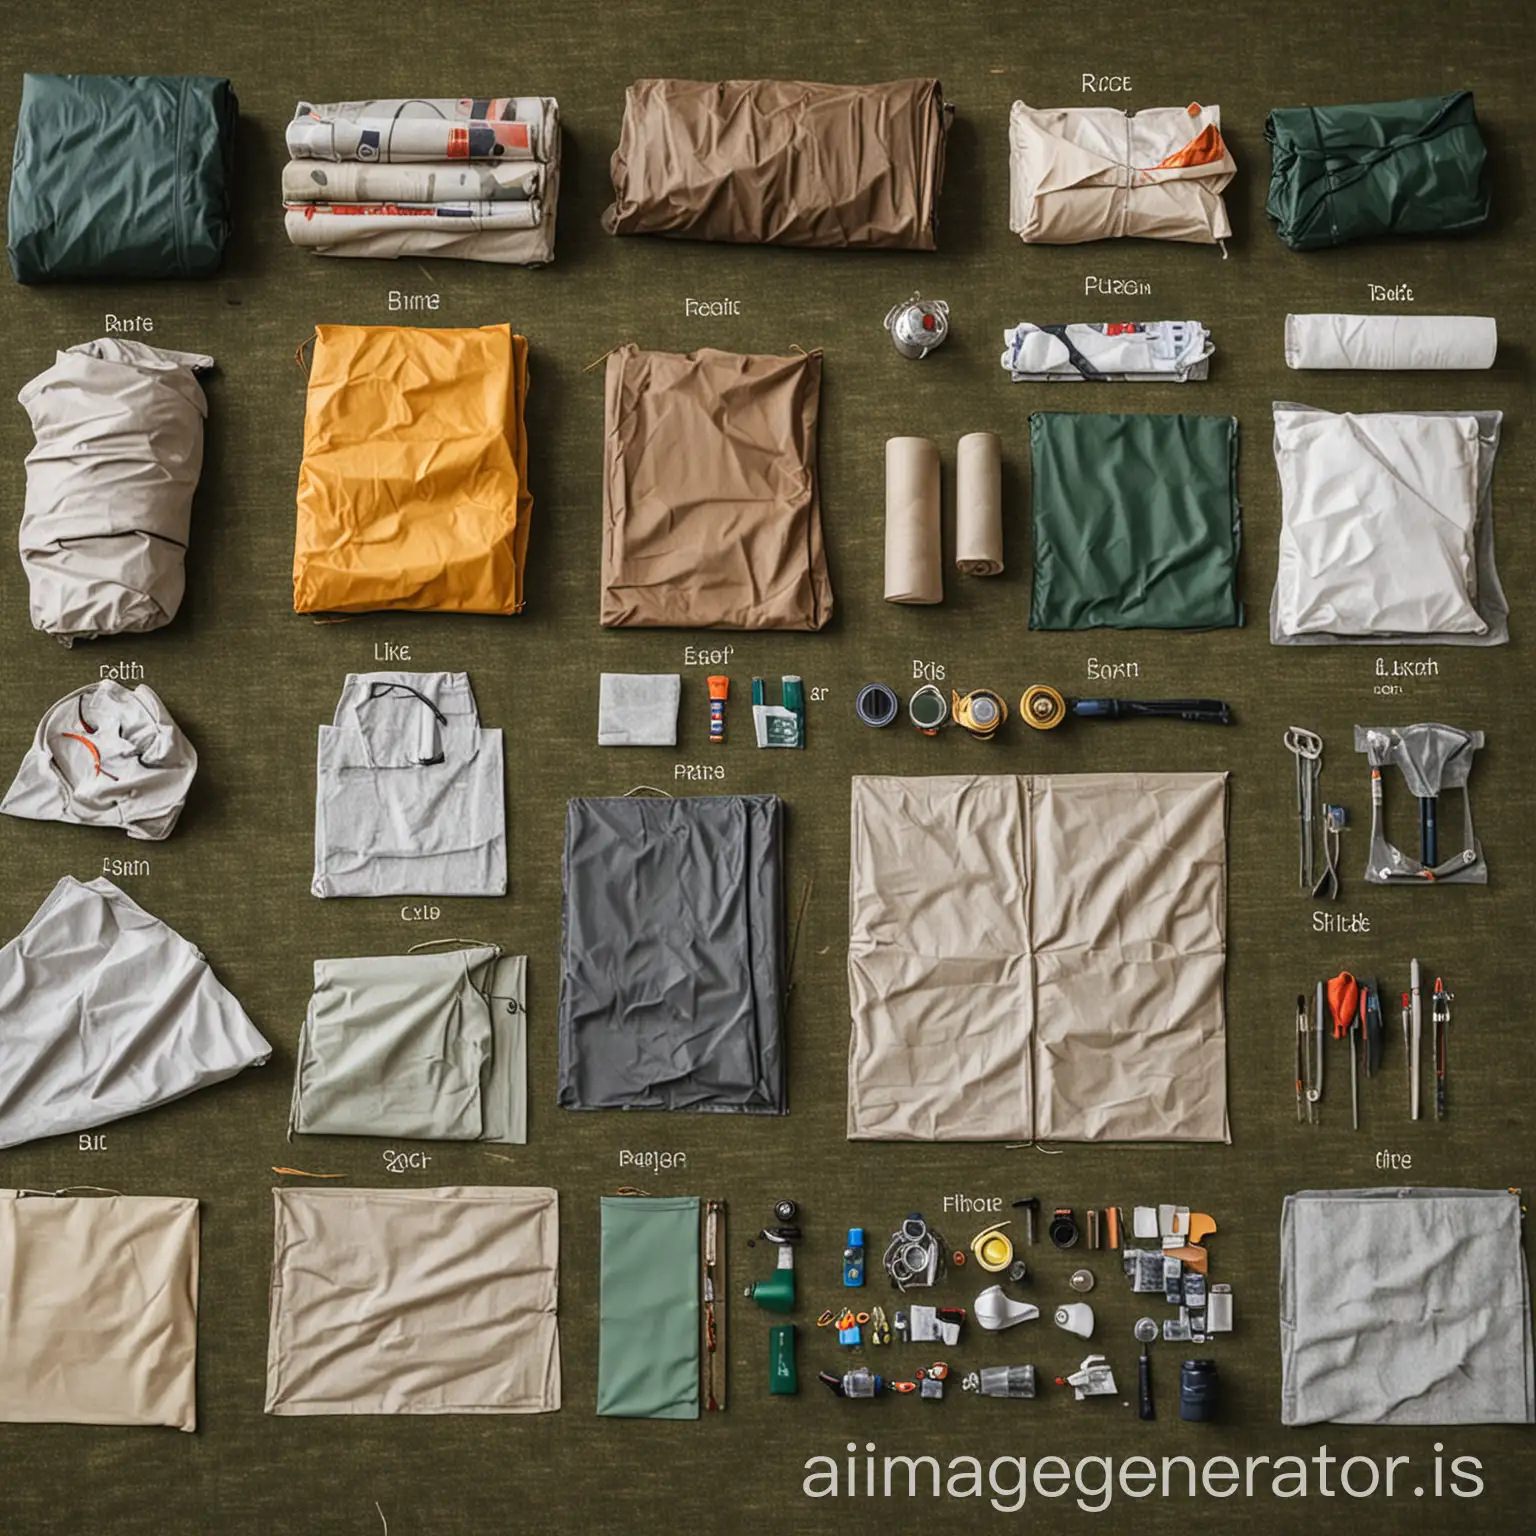 : The image shows a variety of camping tent materials laid out on a table. The materials include waterproof fabrics, lightweight but durable textiles, and flexible yet strong materials. Each material is labeled with its properties and intended use in camping tent construction.

This detailed image provides a visual representation of the factors influencing material choice in camping tent construction, showcasing the different options available to manufacturers and designers.